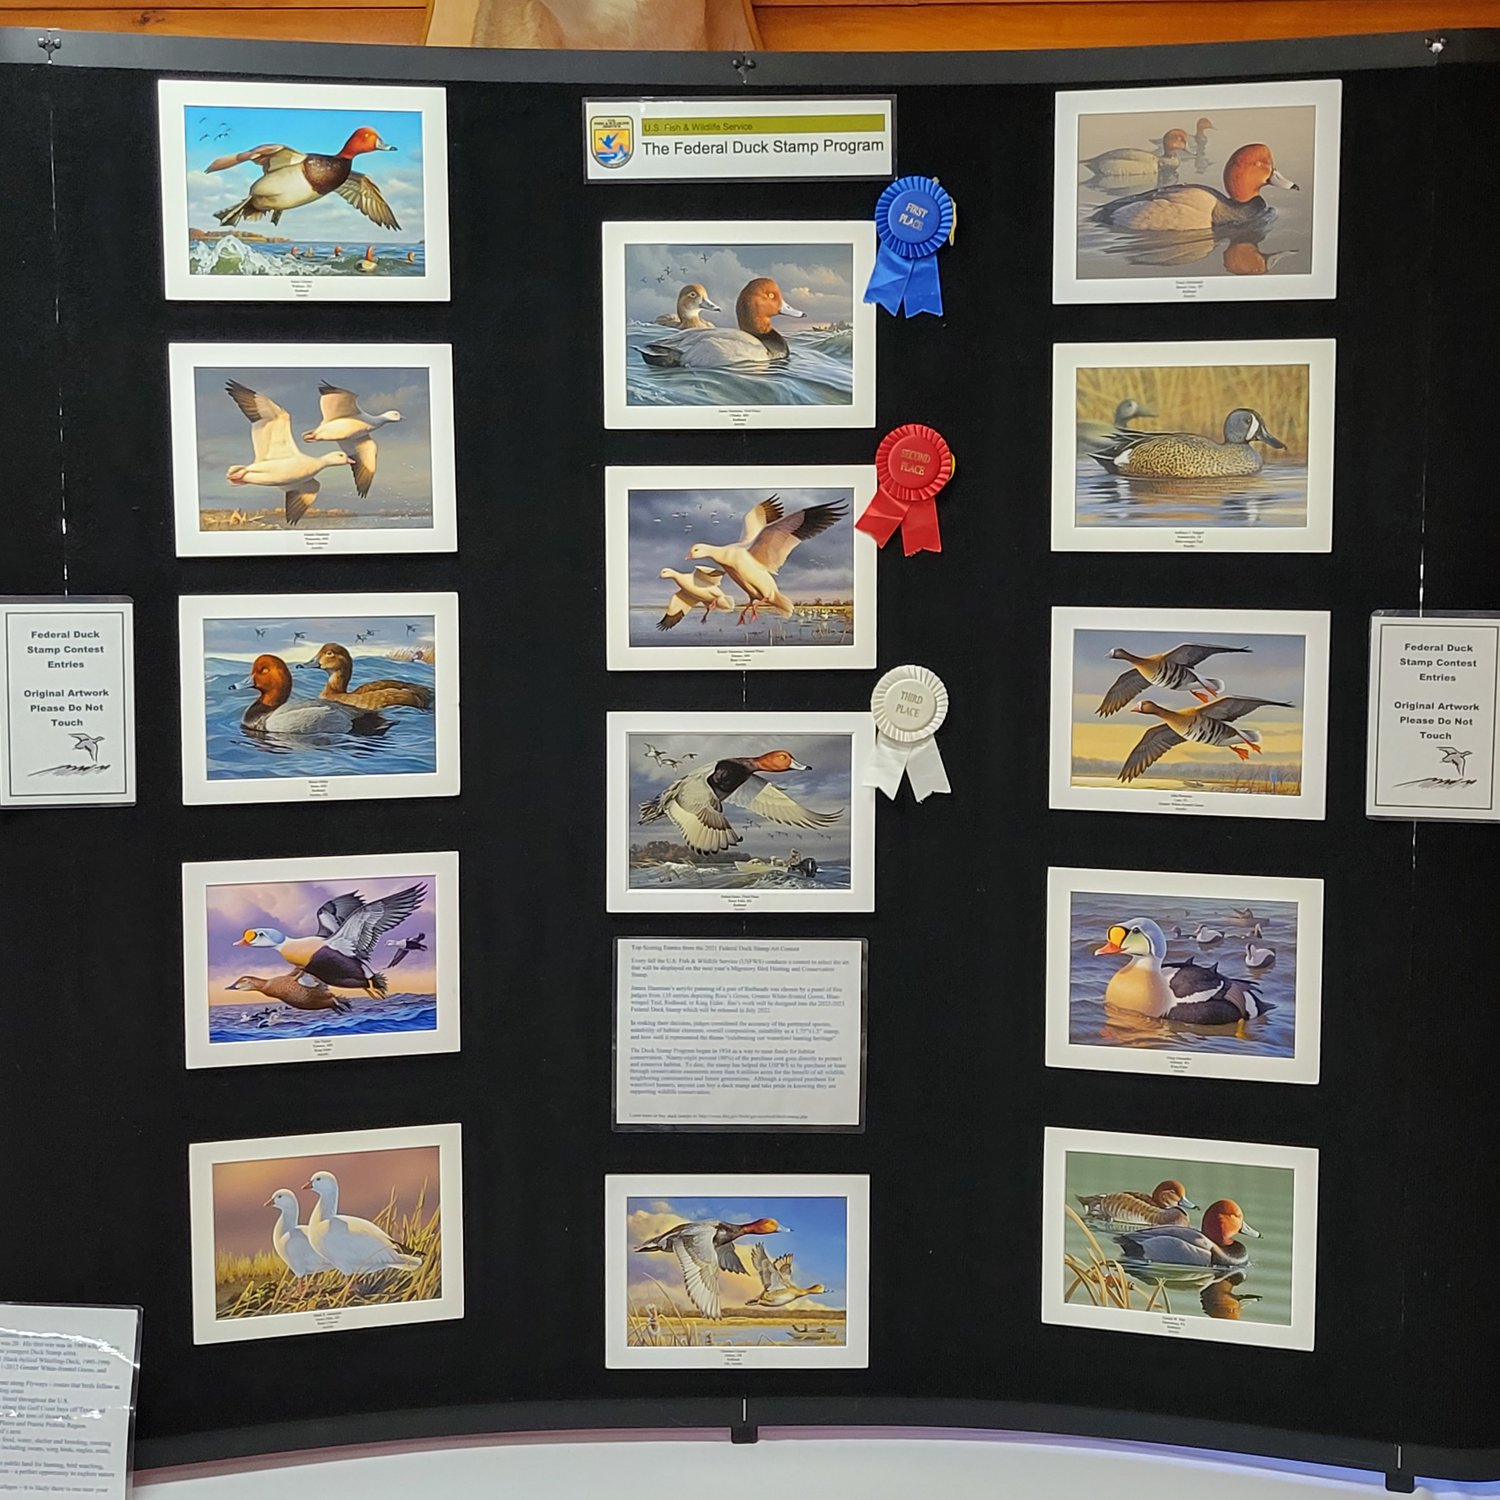 The Federal Duck Stamp, original artwork, display of this year’s contest winners.